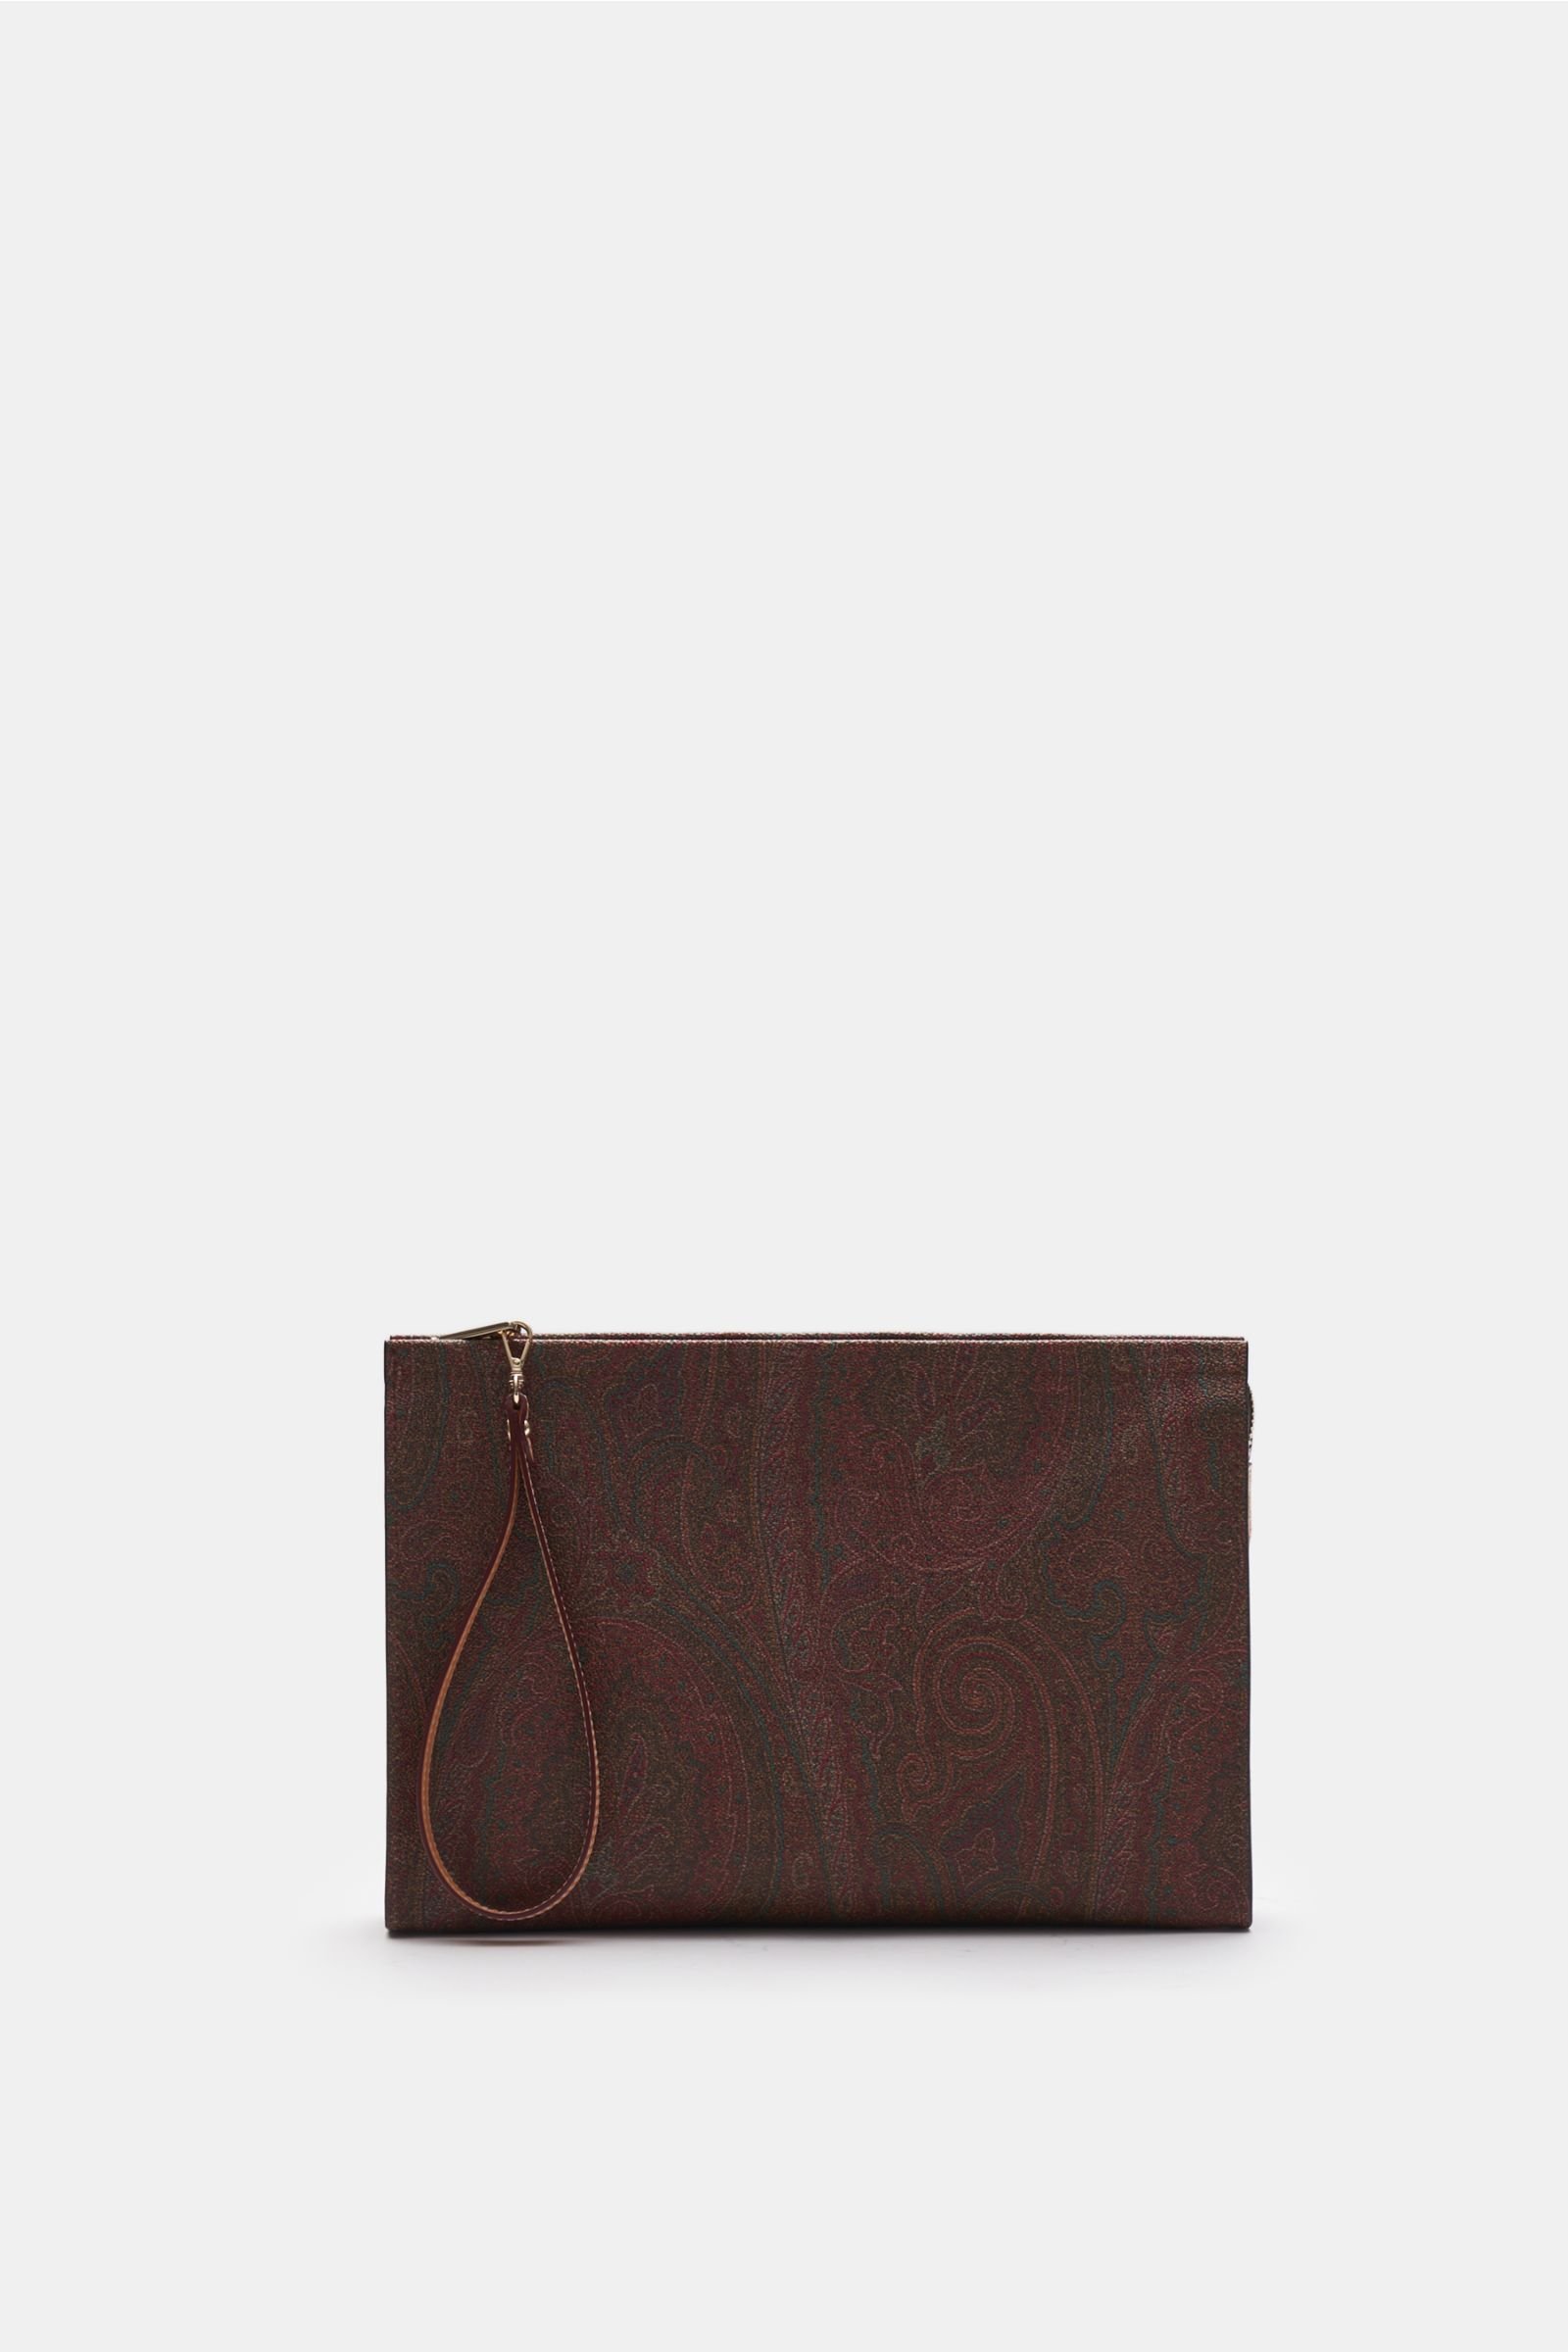 Document sleeve brown patterned